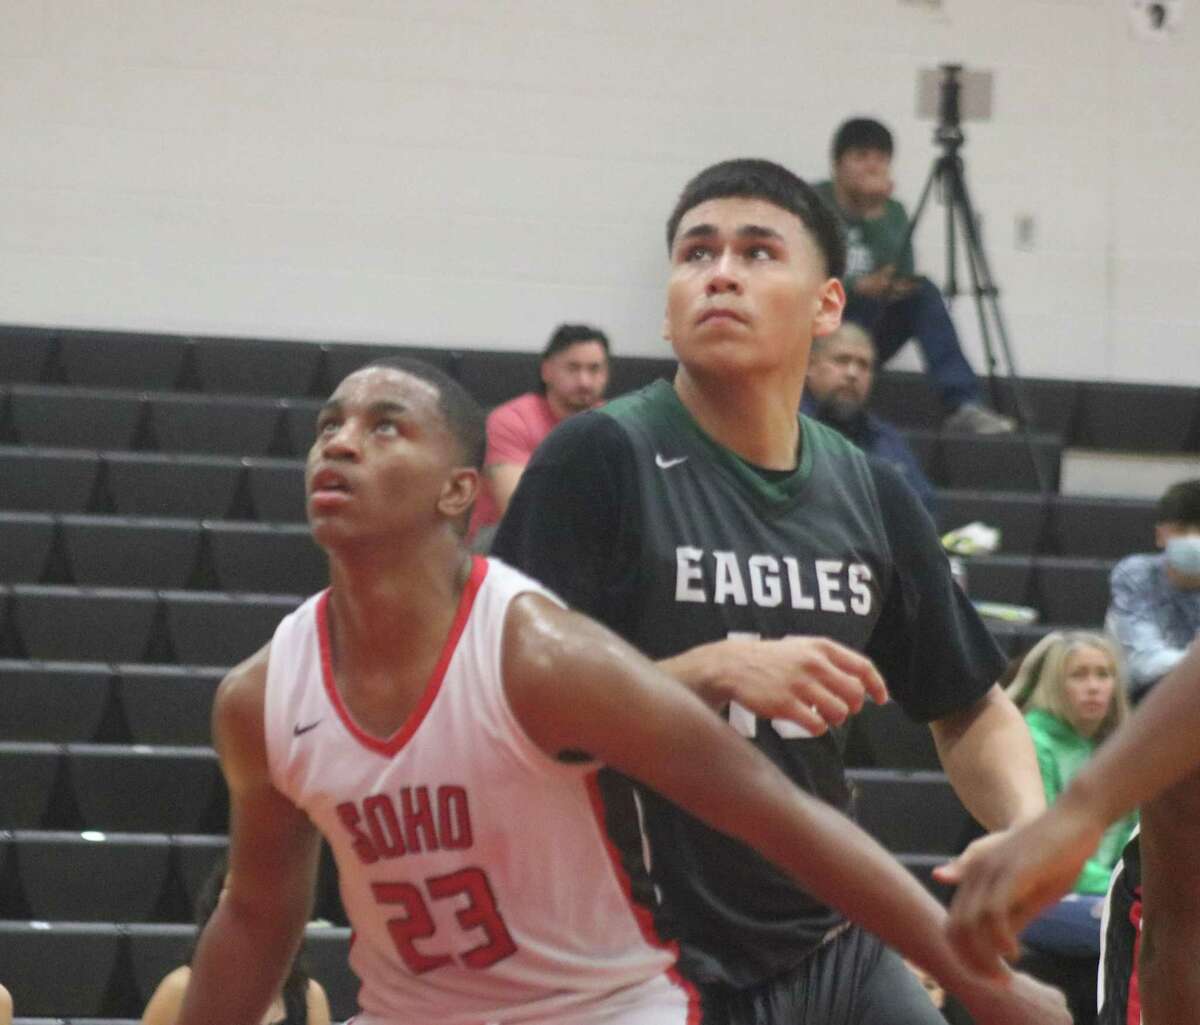 South Houston's Mijai Mickles (23) attempts to keep Pasadena's Kevin Juarez away from a possible errant foul shot attempt during Saturday's game.